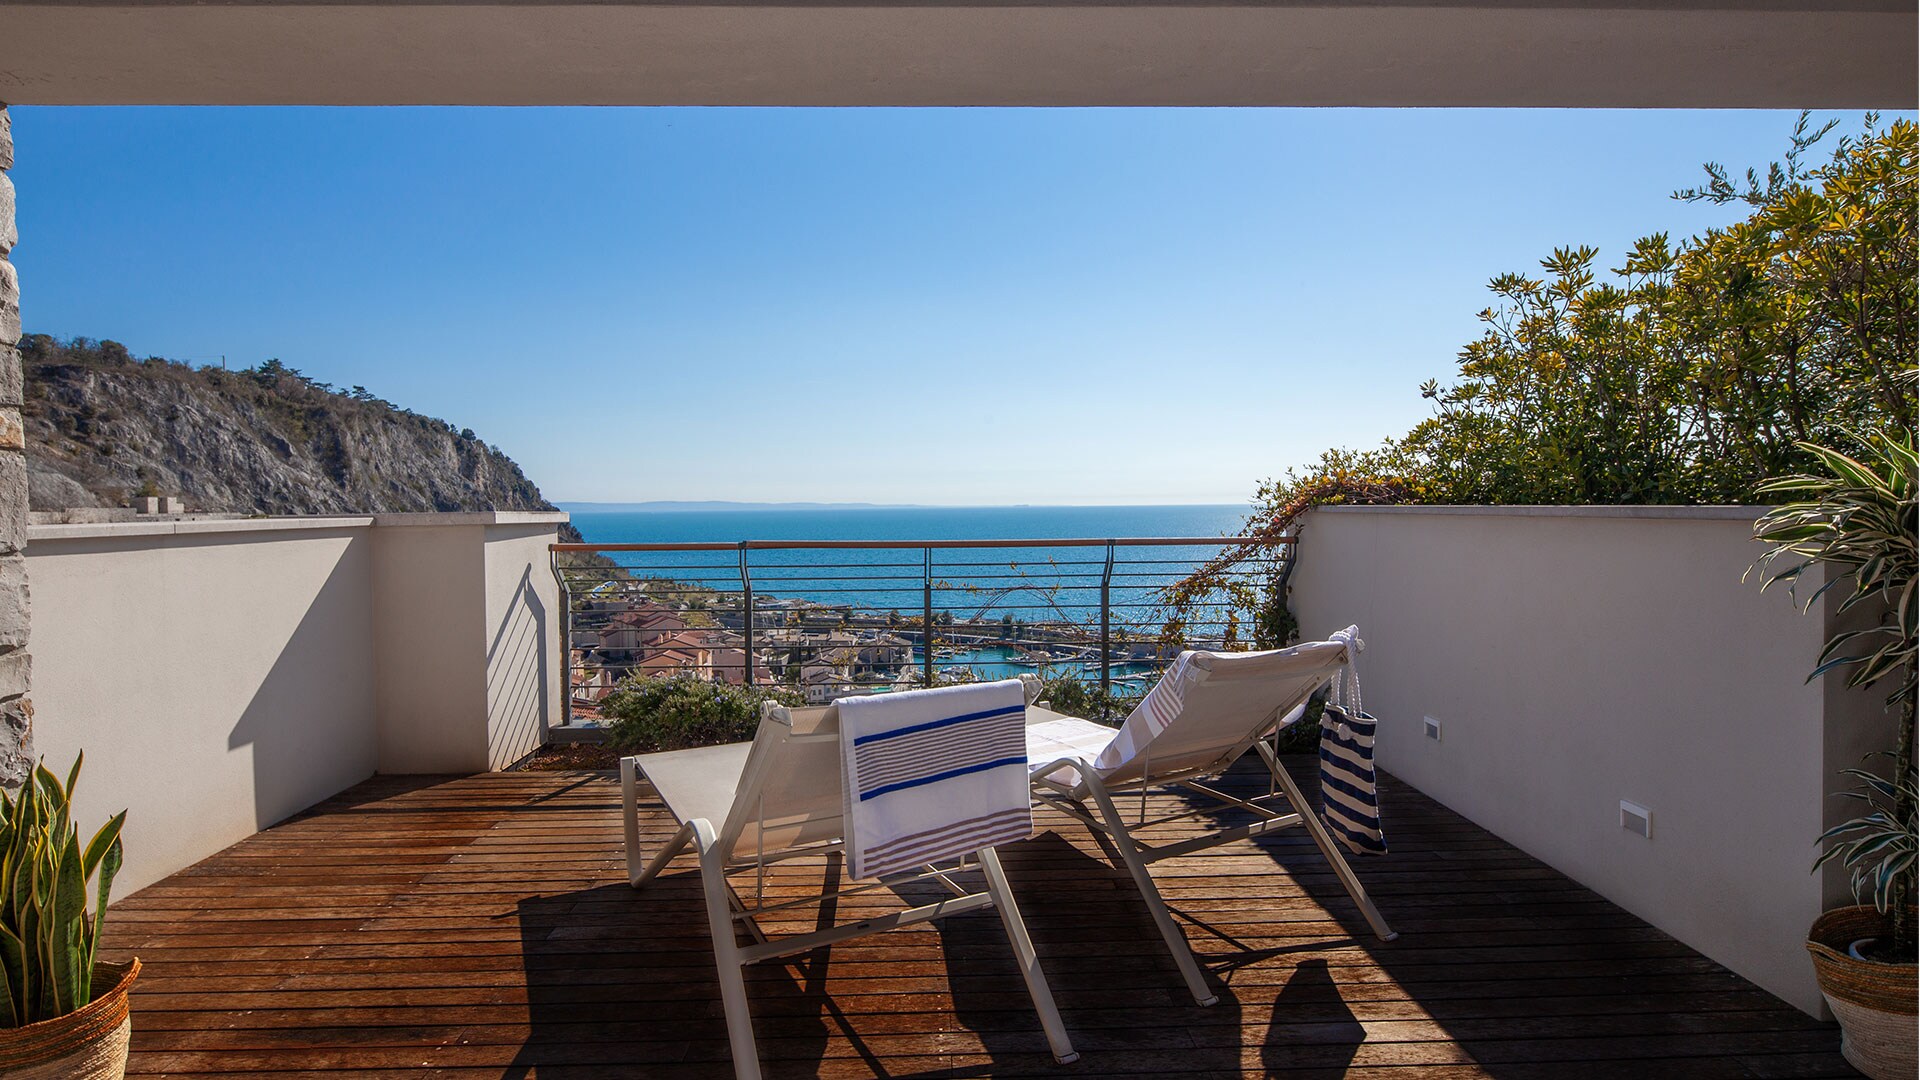 Property Image 2 - Fabulous terraced apartment with a spectacular view on Portopiccolo harbour and the Gulf of Trieste